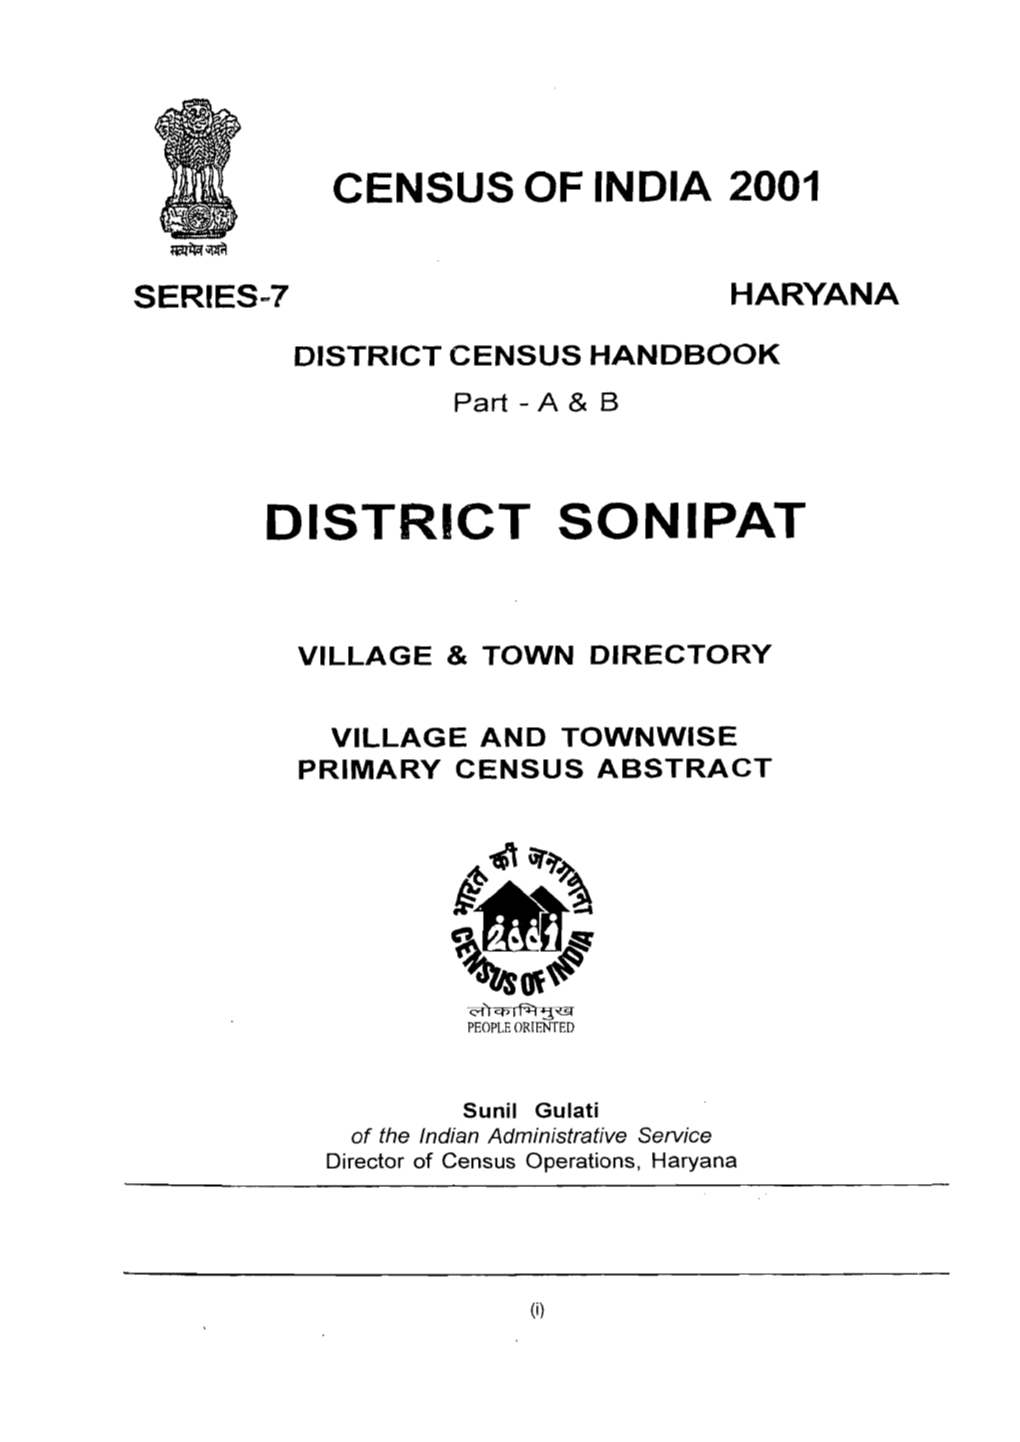 Village and Townwise Primary Census Abstract, Sonipat, Part XII A